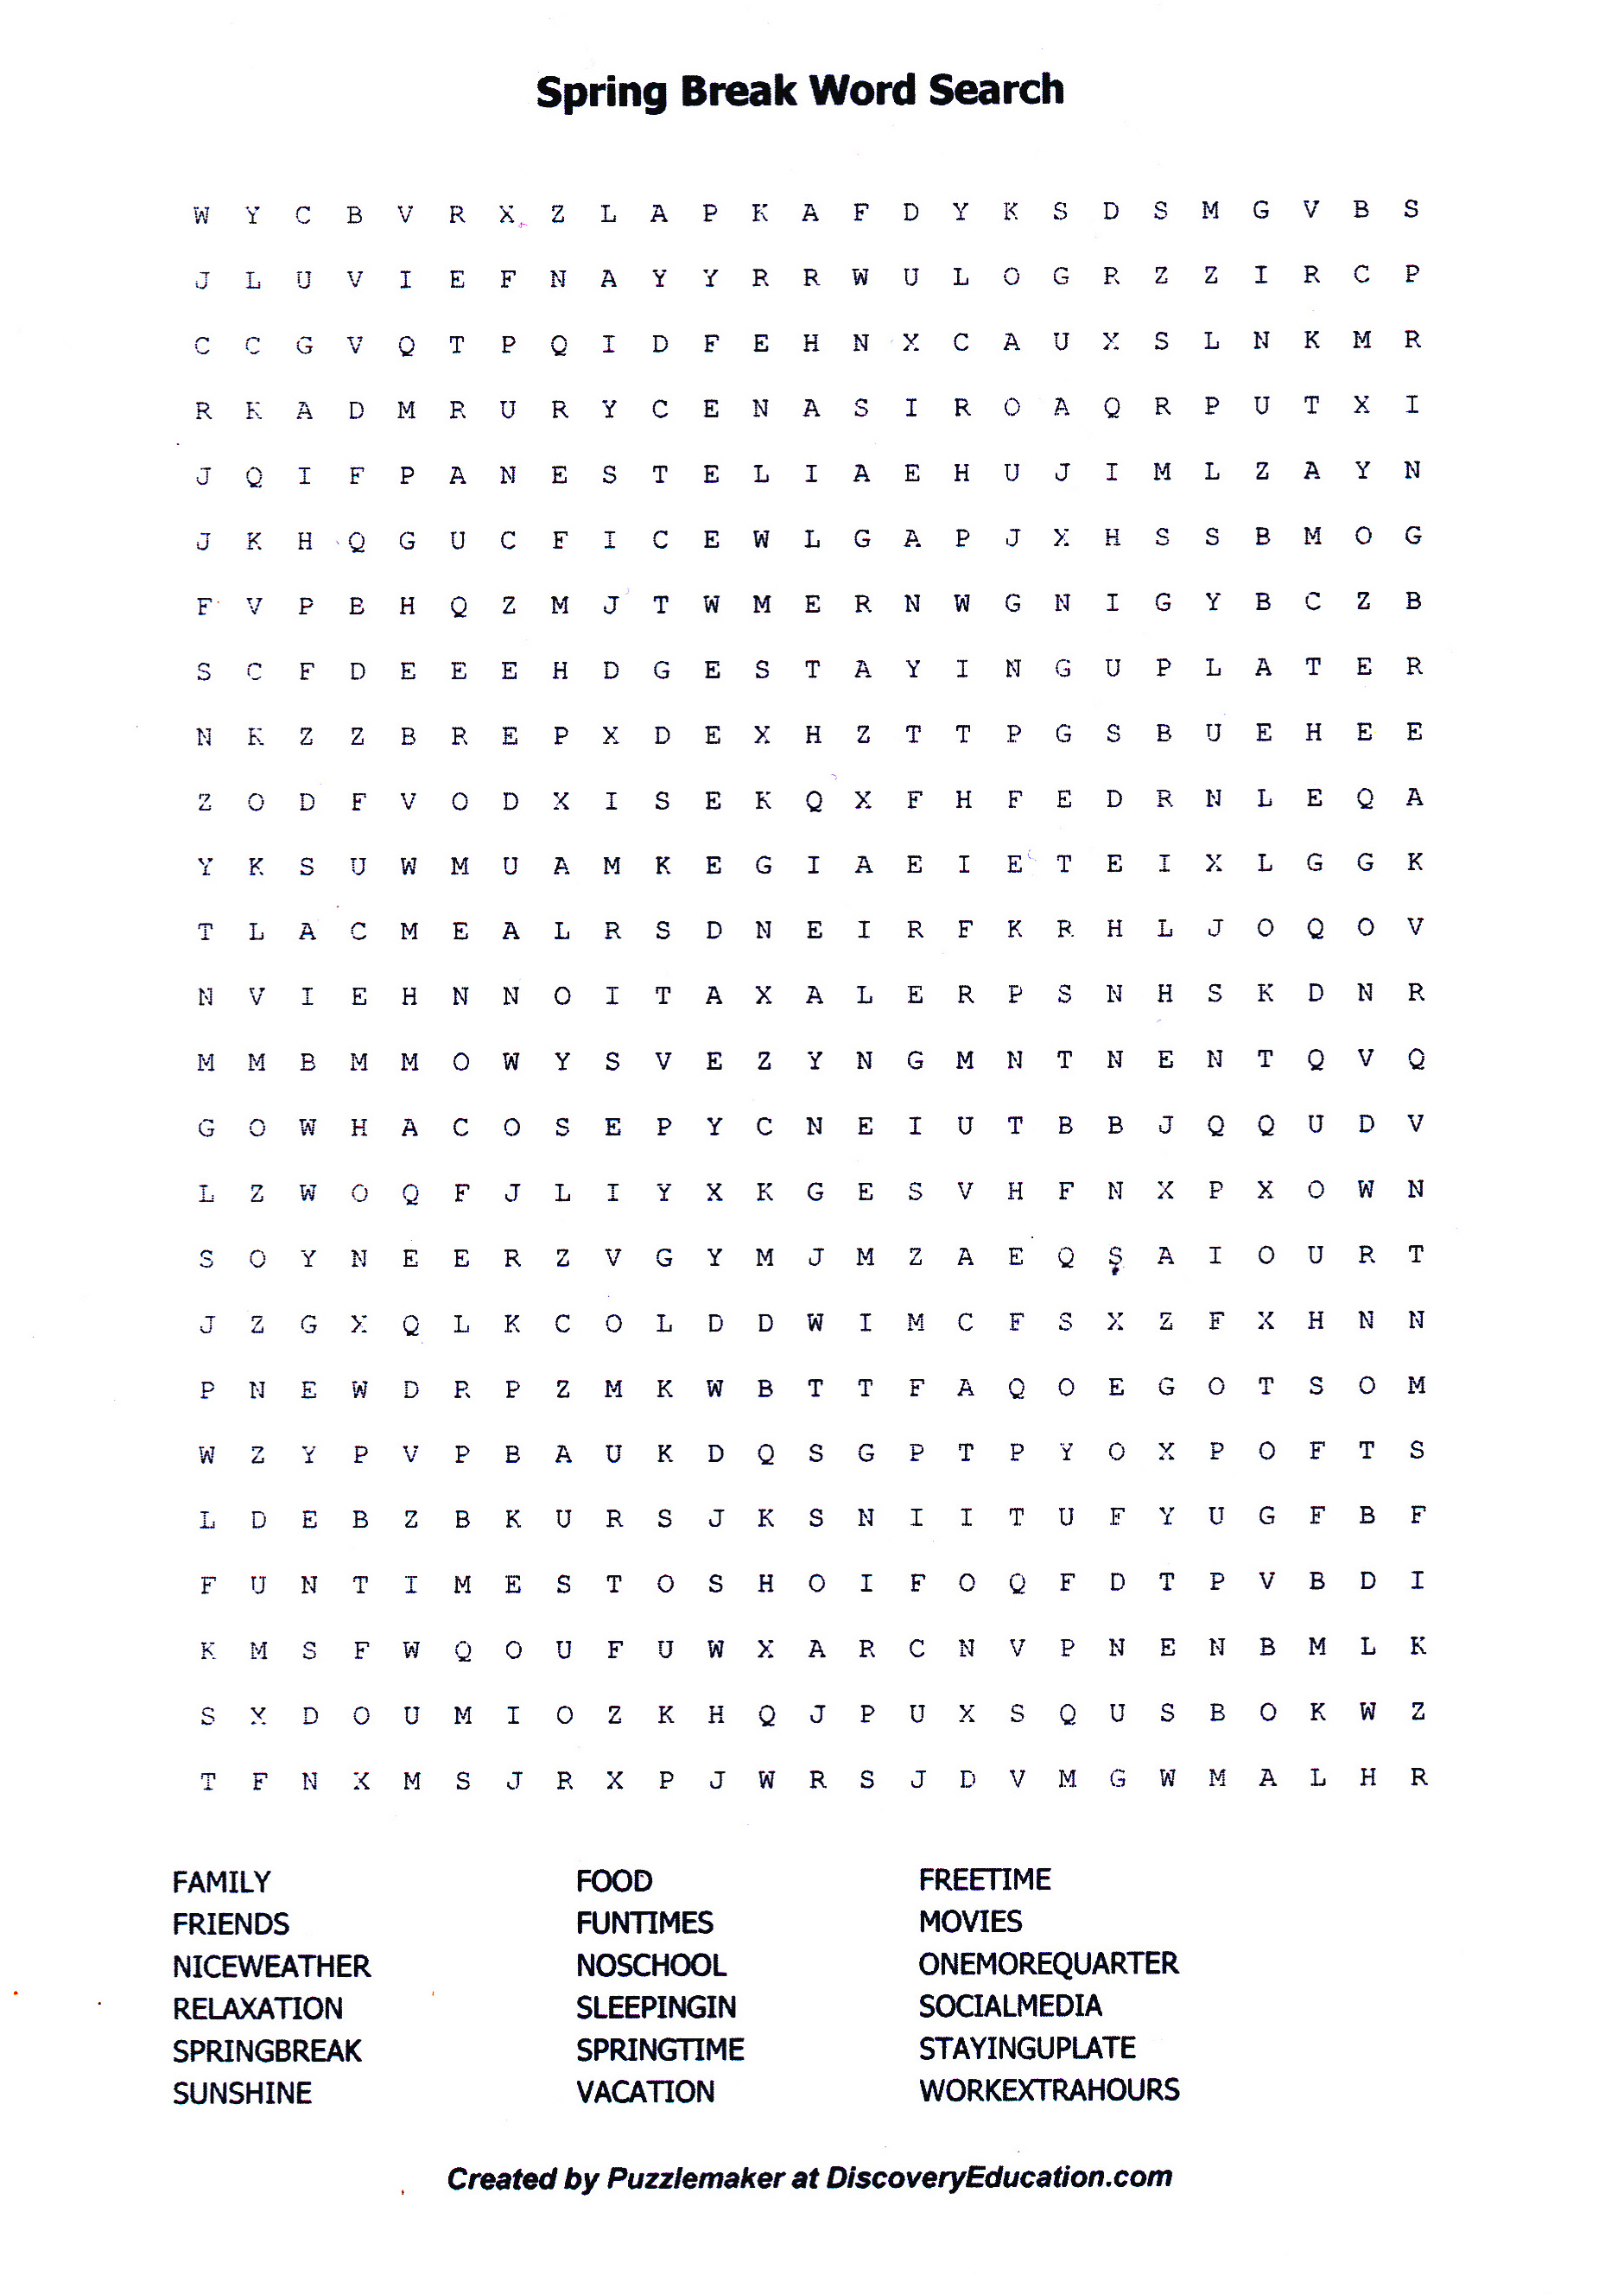 hardest-word-search-ever-printable-word-search-printable